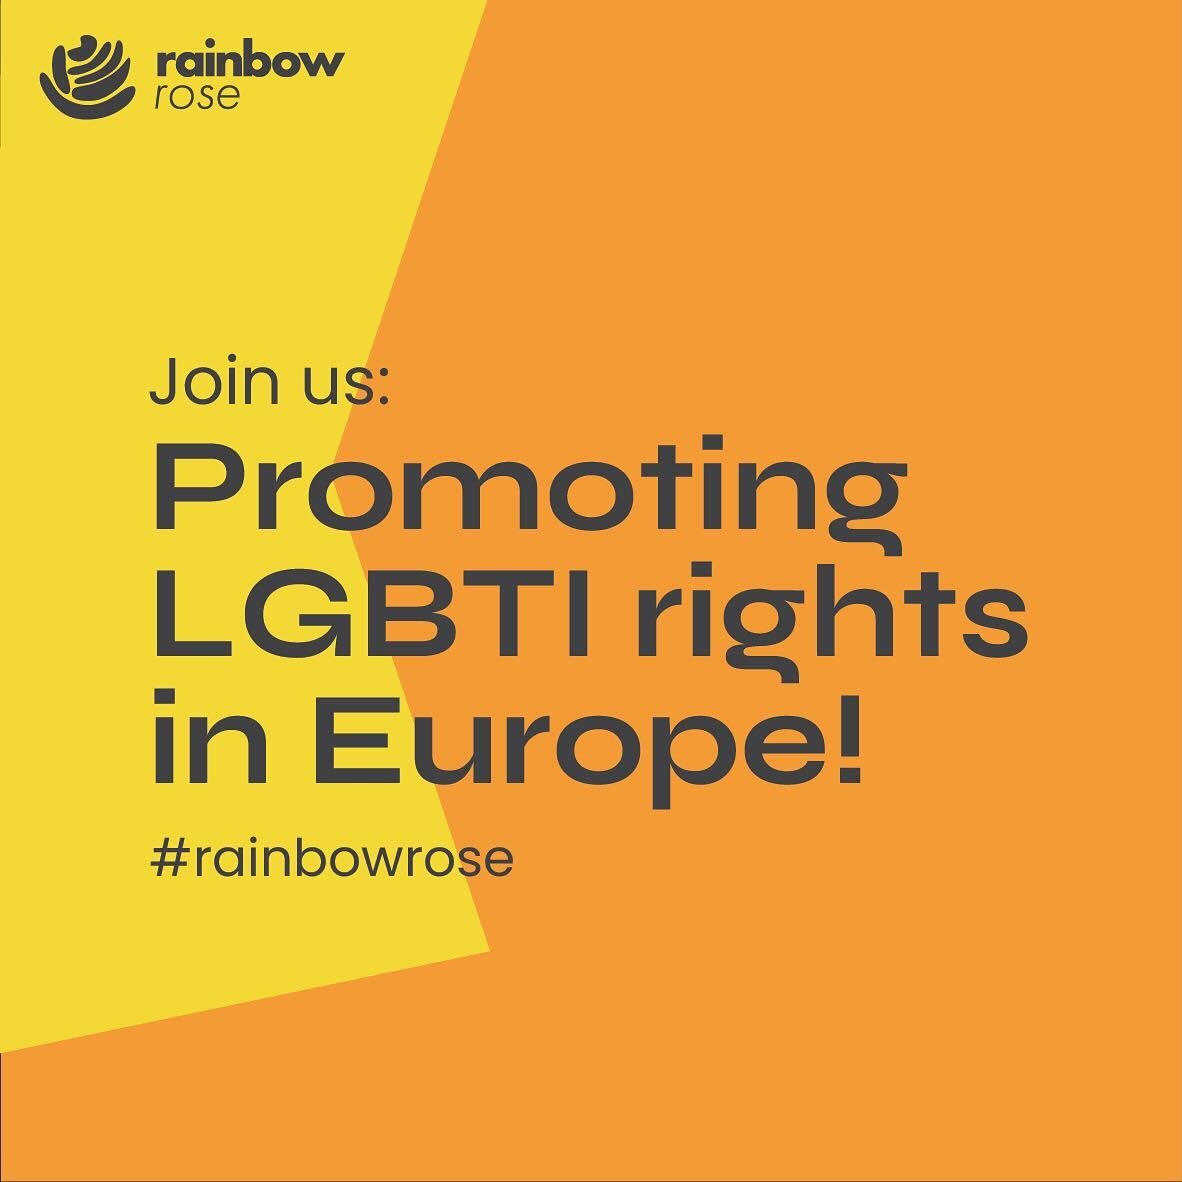 As @rainbowrose_pes we are proud to fight for LGBTI rights all over Europe 🏳️&zwj;🌈🏳️&zwj;⚧️ Together with @pes_pse we stand for an inclusive, fair Europe! 🌹